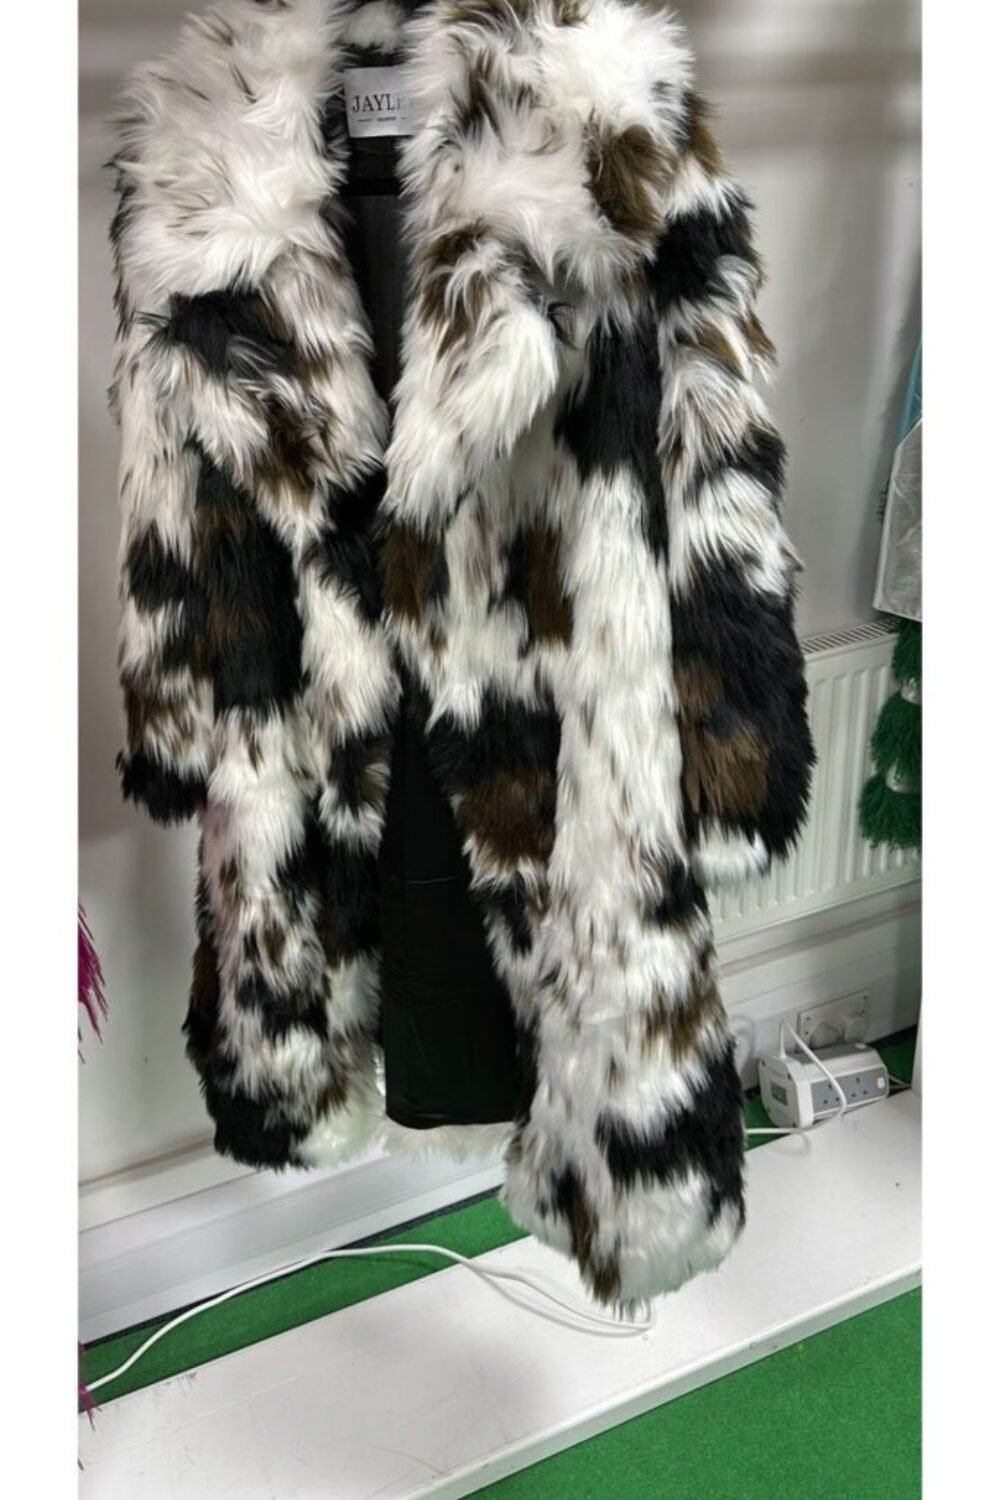 Shop Lux Bamboo Lyocell Blend Hand Painted Faux Fur Coat and women's luxury and designer clothes at www.lux-apparel.co.uk